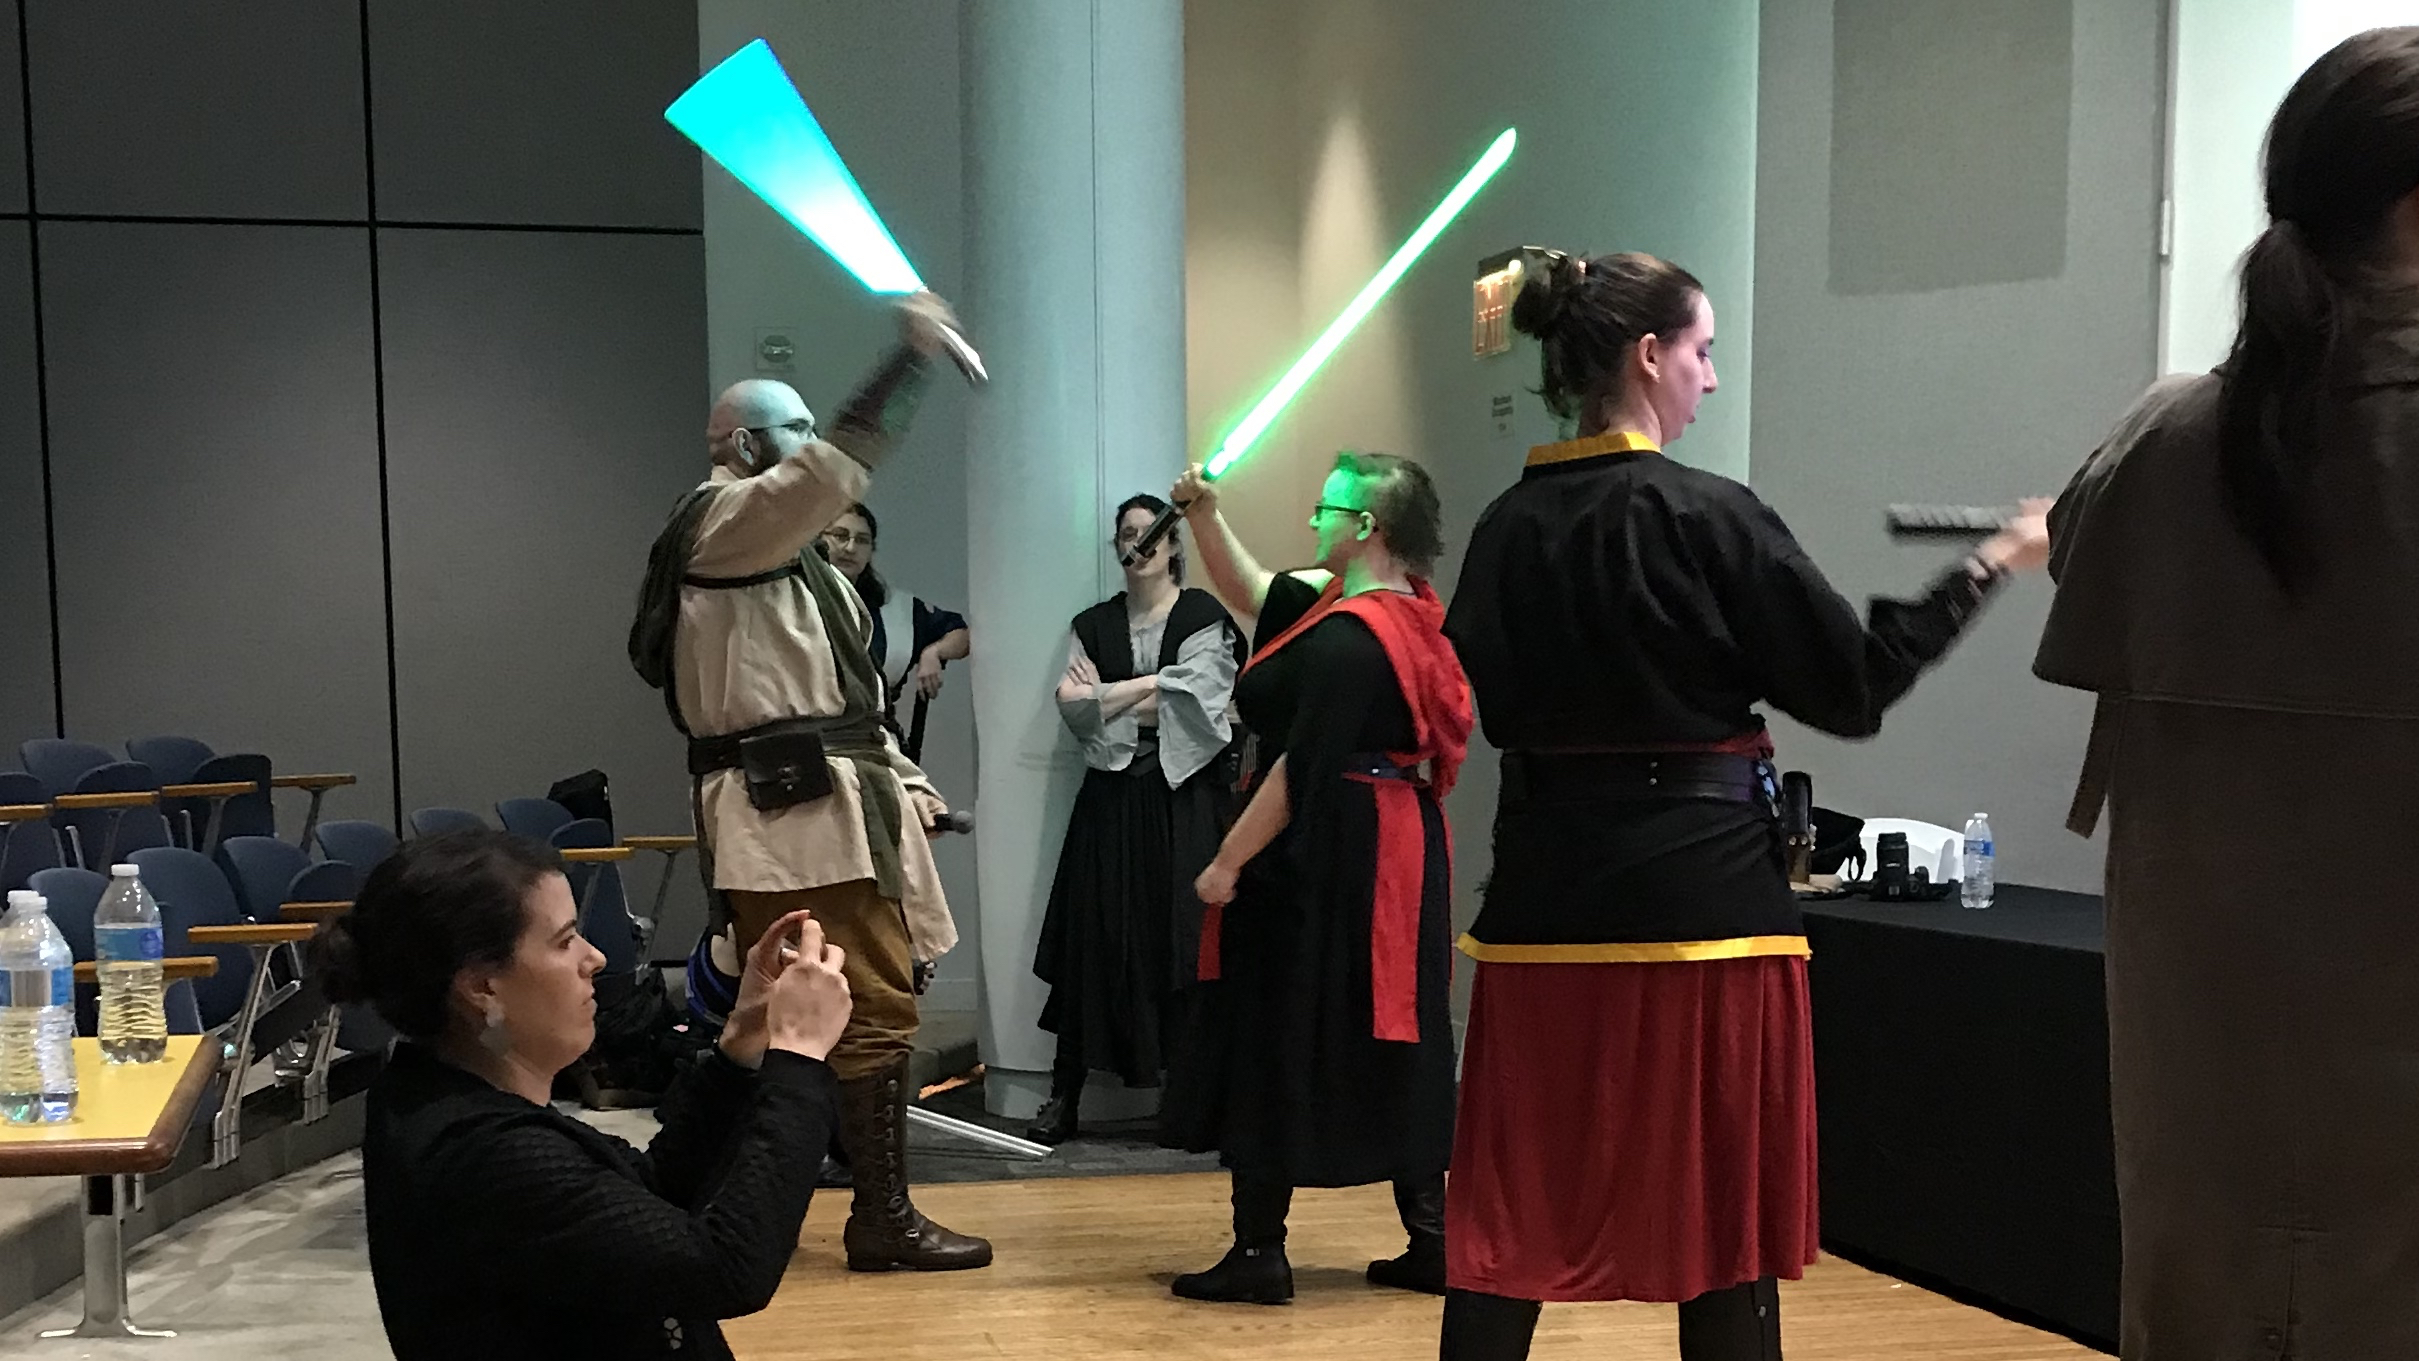 Lightsaber demo at Women In Comics Con 2019